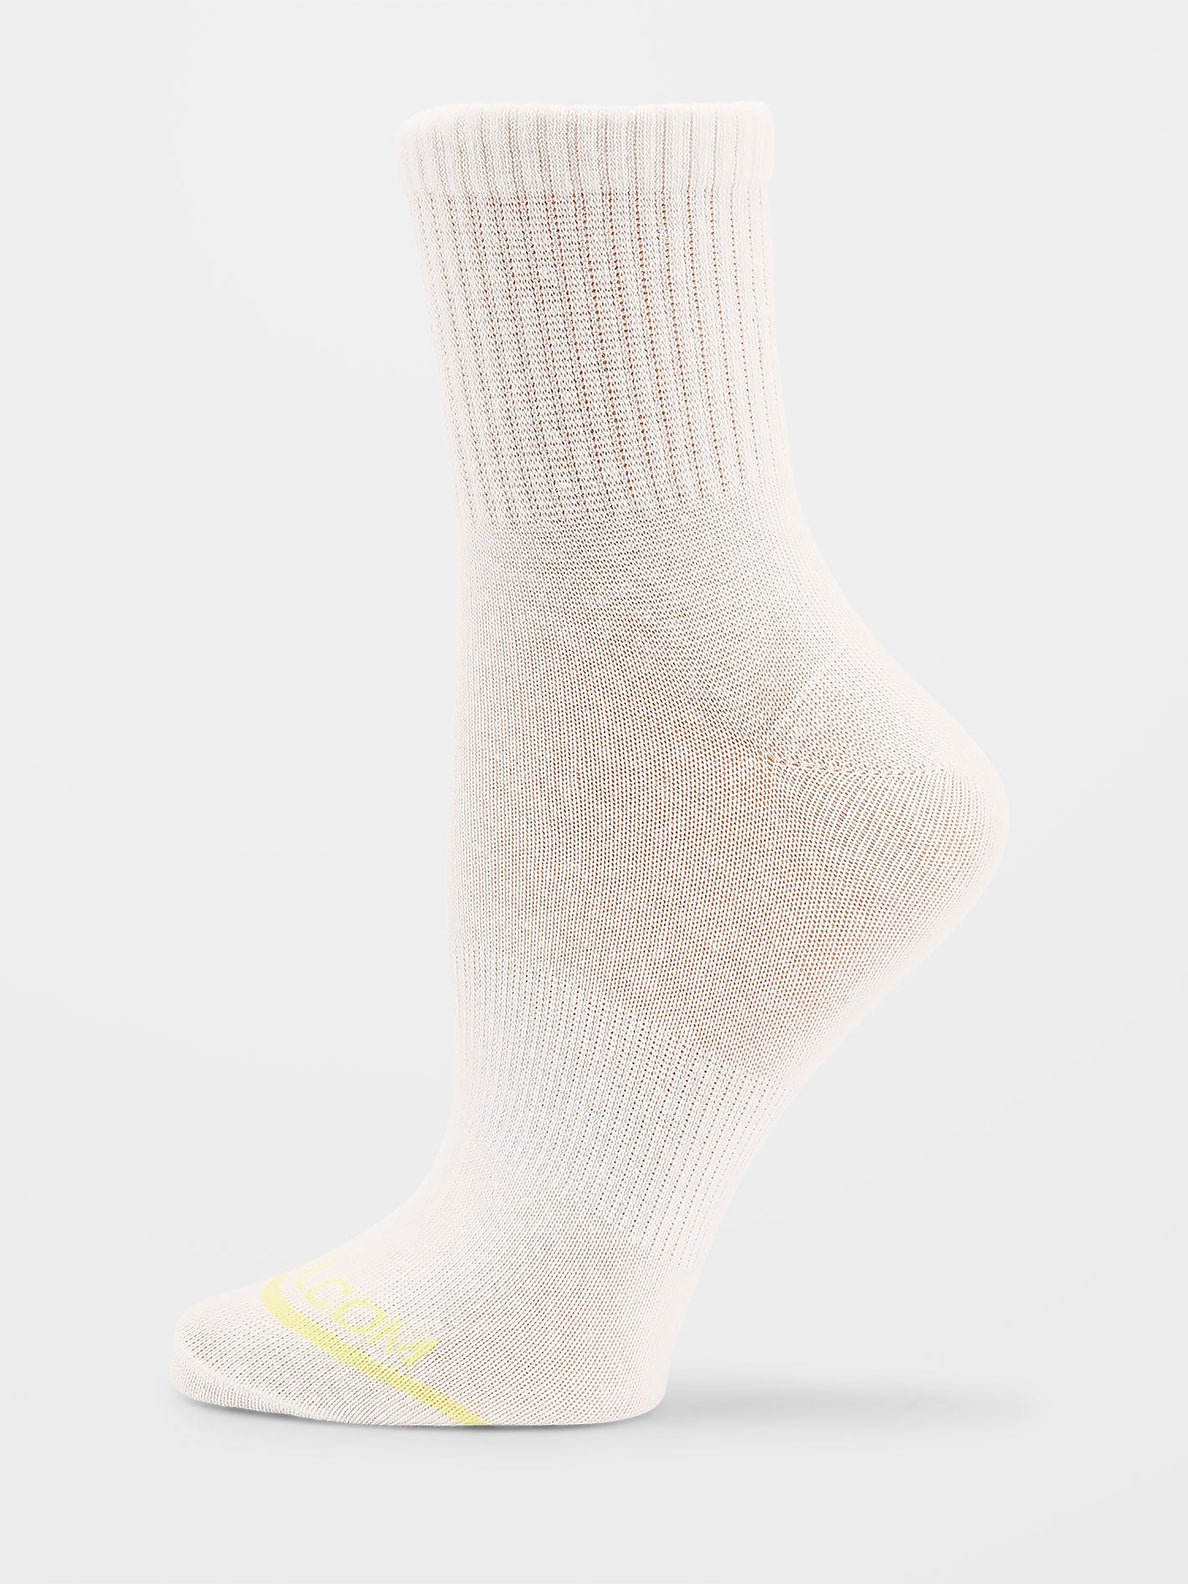 The New Crew Socks (3 pack) - ASSORTED COLORS (E6332200_AST) [5]